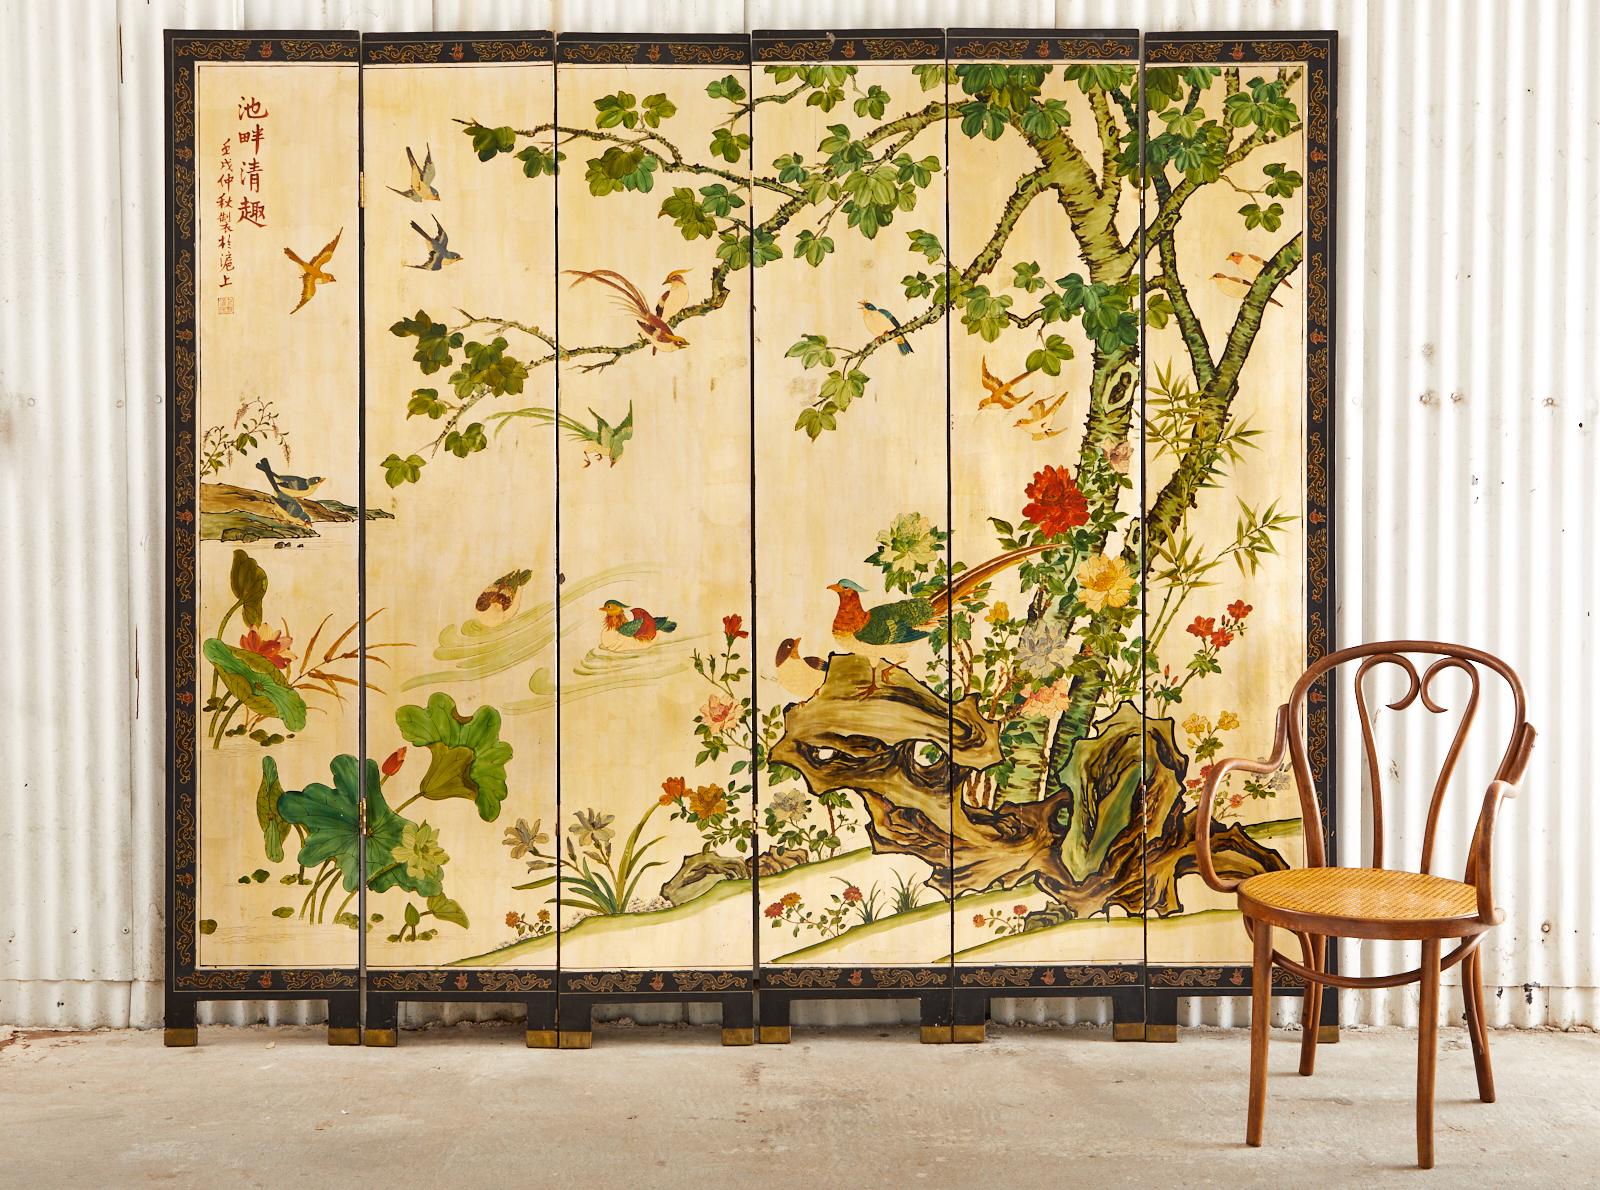 Radiant Chinese export six-panel coromandel screen. Featuring lacquered panels over a dramatic gilt gold leaf square ground. Beautifully hand-painted with intricate details depicting a flora and fauna landscape scene at a river's edge. Delicate